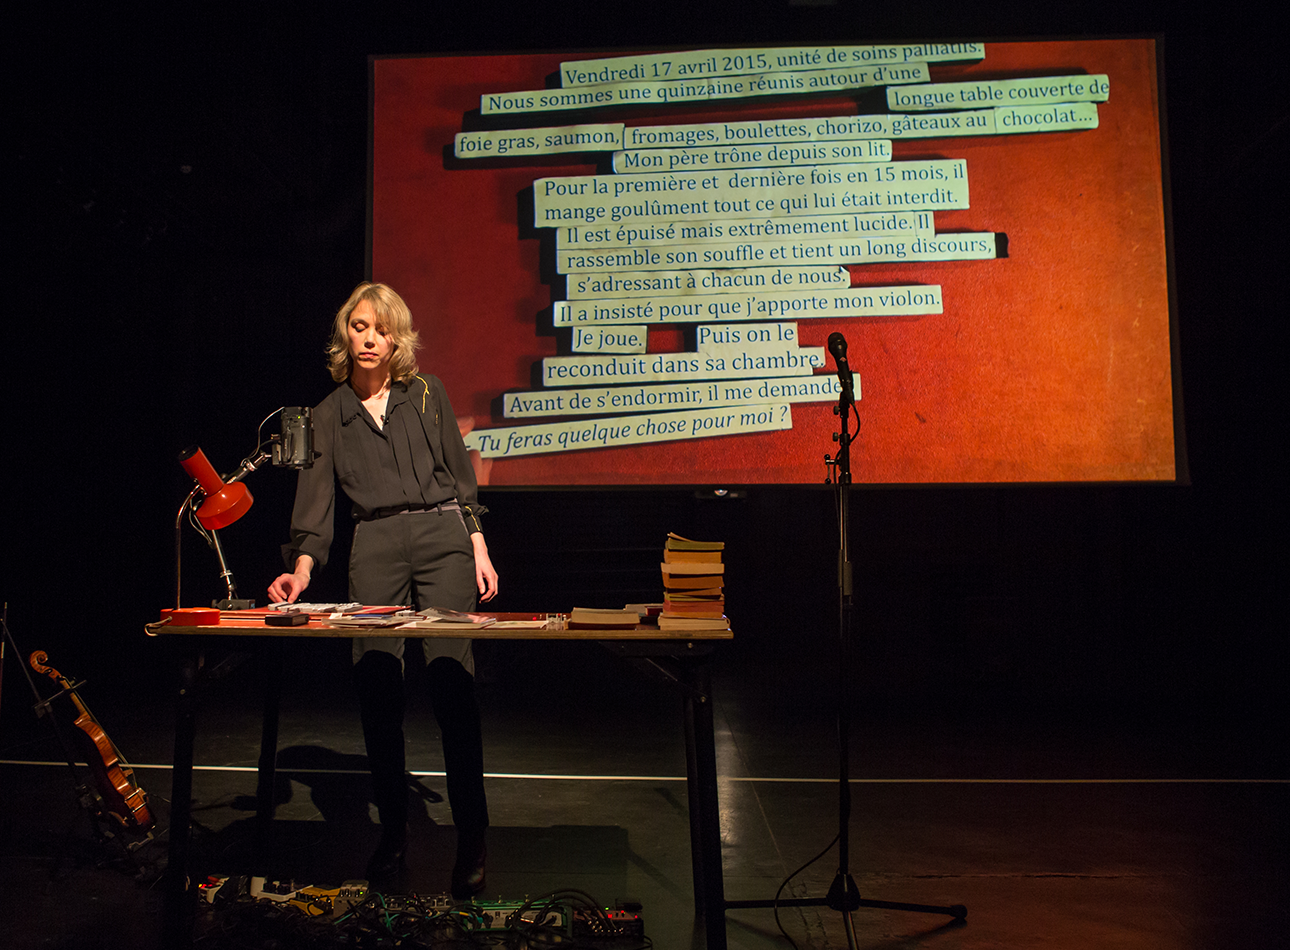 Blond woman stands at a desk with lamp and books in front of a projection of French writing.